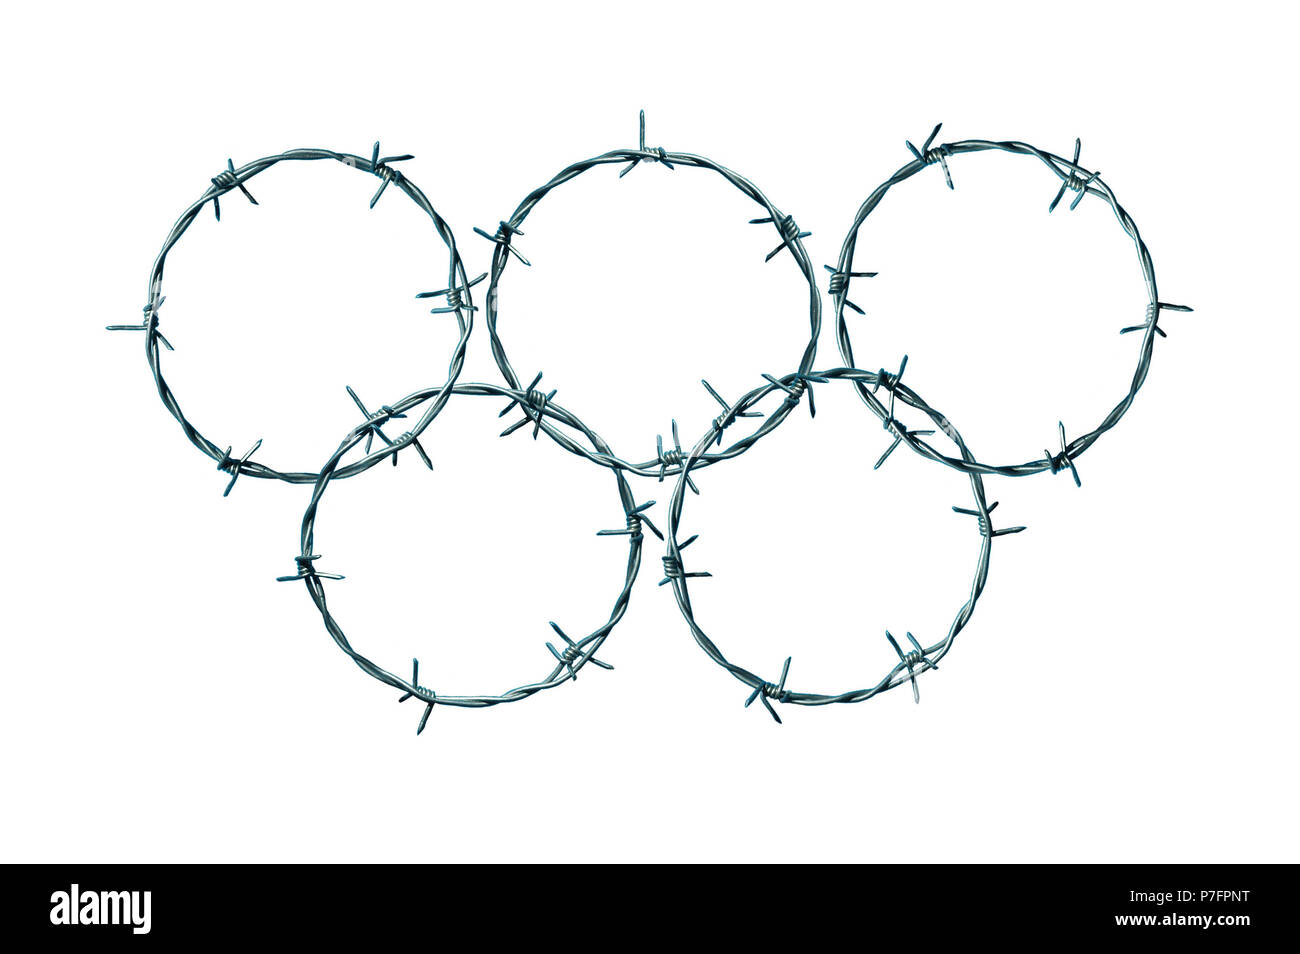 Olympic rings made of barbed wire, symbol picture for repression and human rights, studio shot, cutout Stock Photo